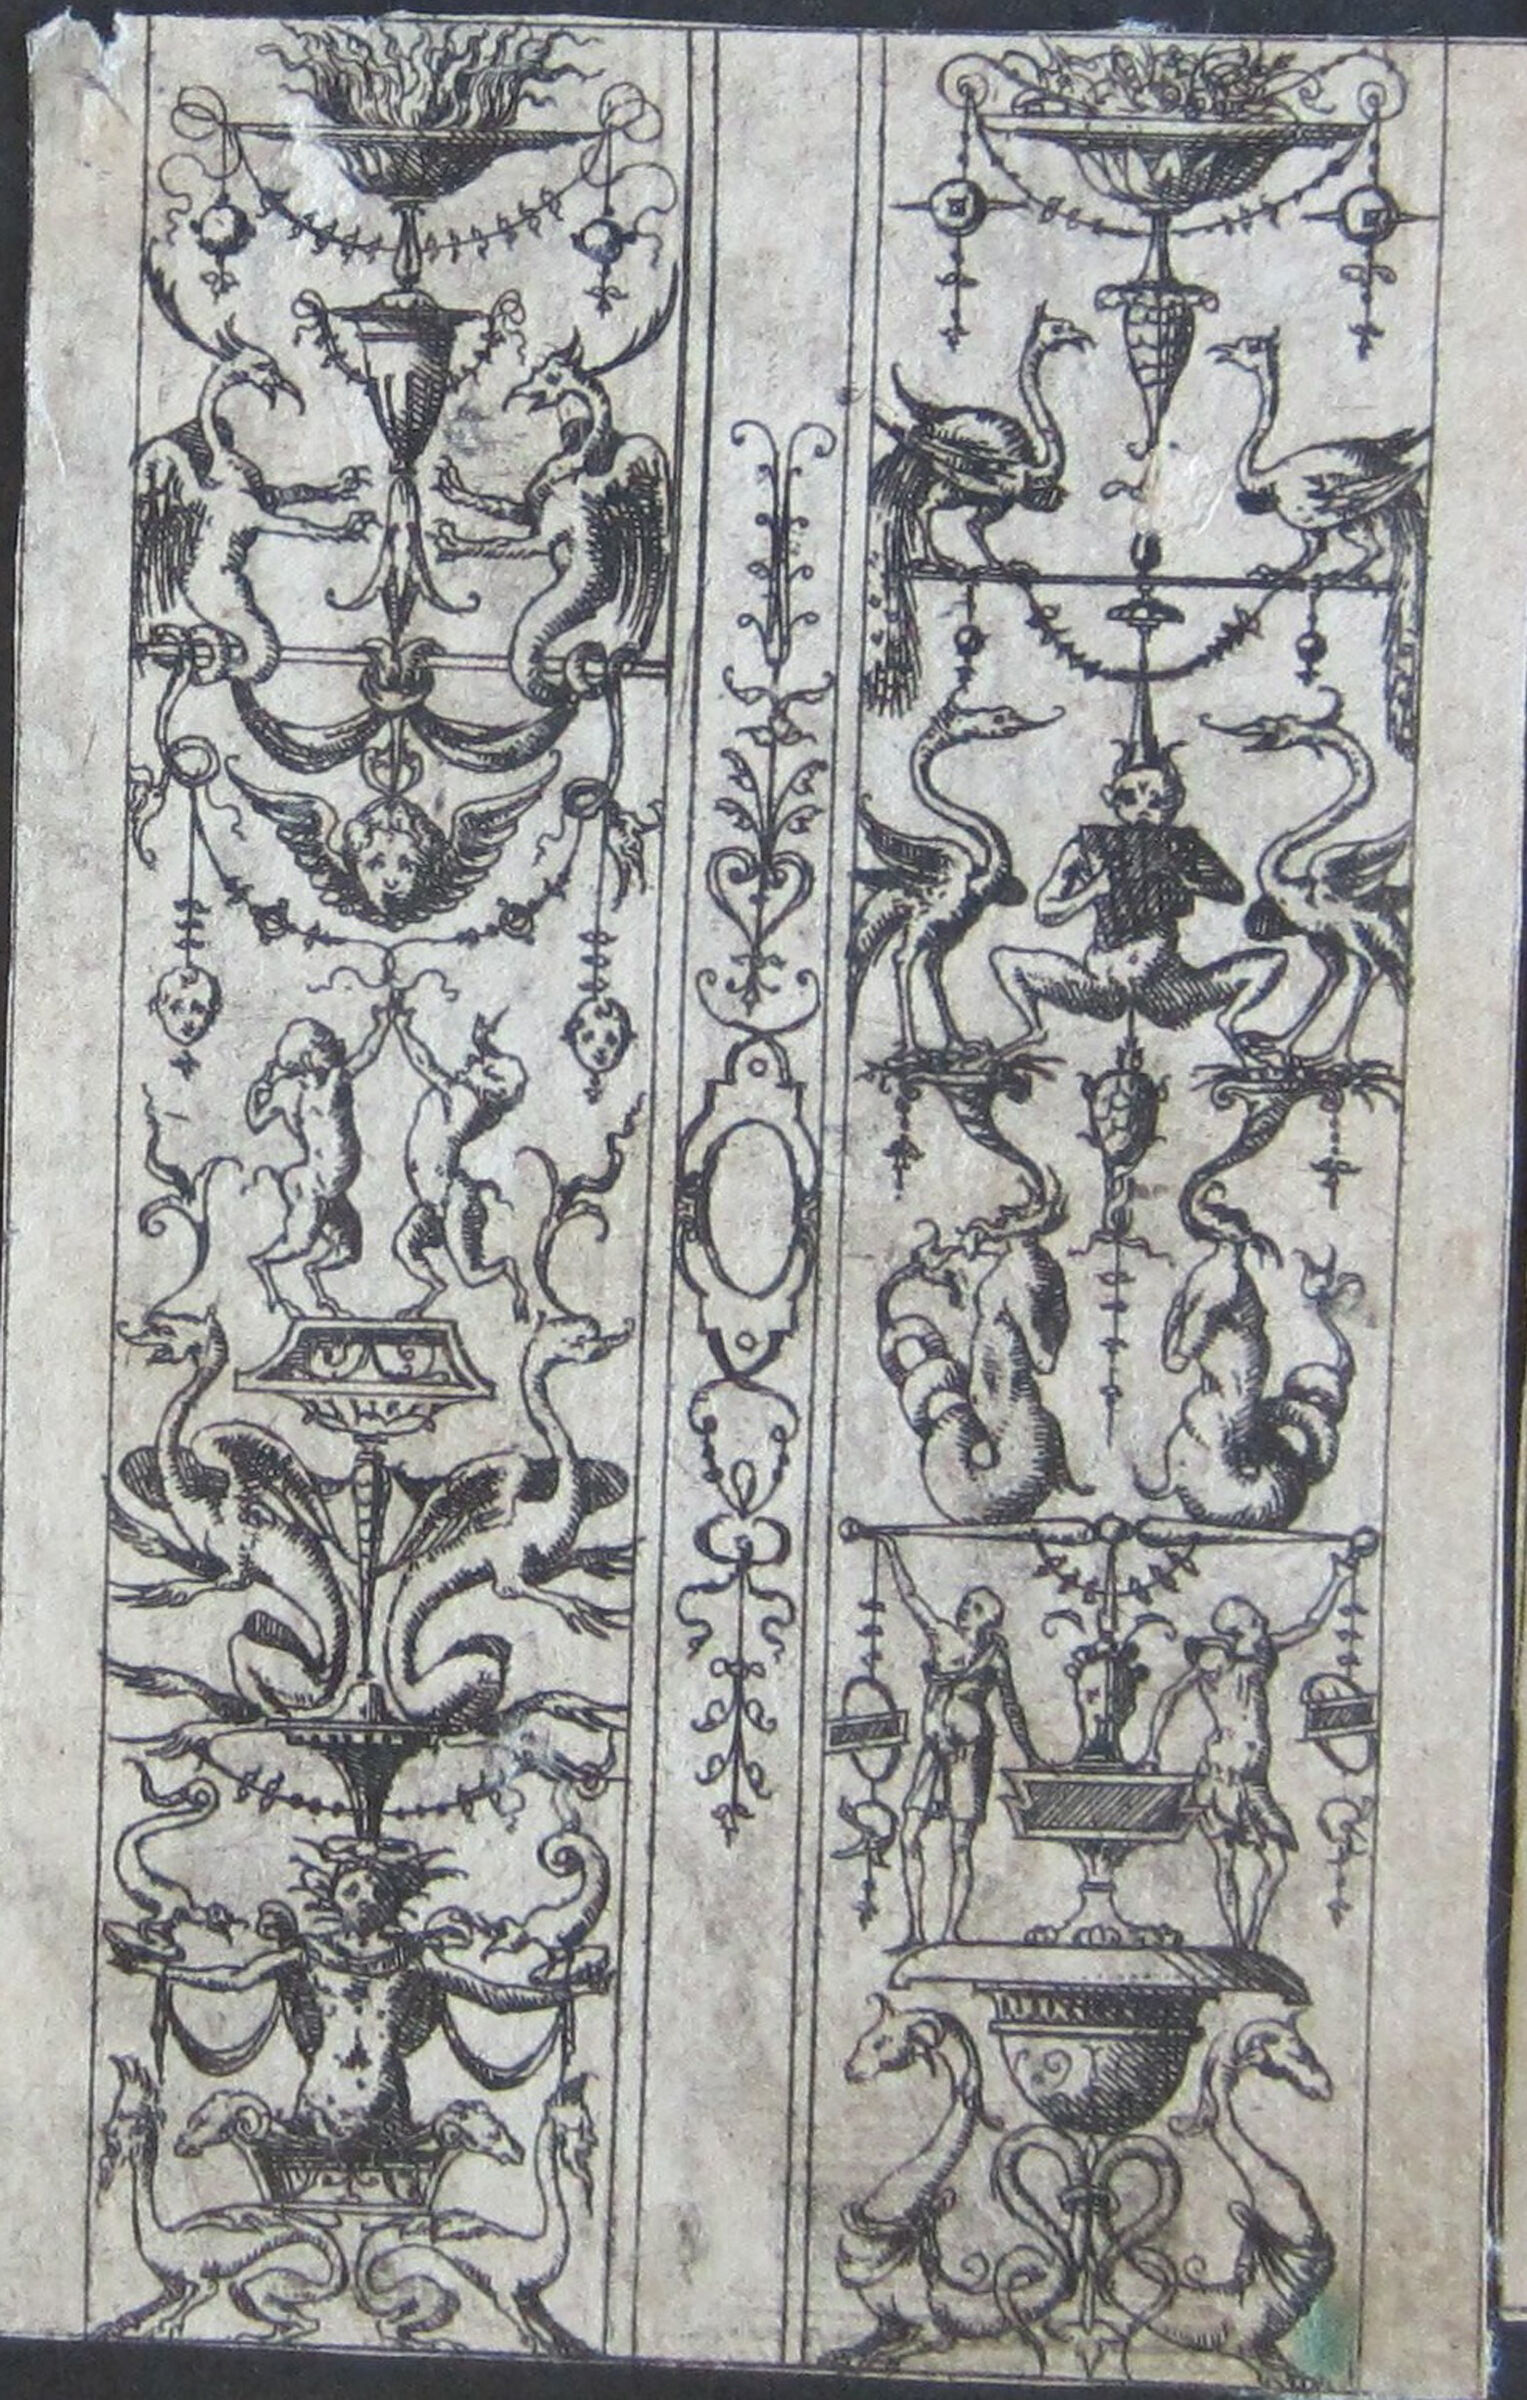 Two Grotesques Separated By A Vertical Band Of Ornament, The Left Grotesque With Dancing Satyrs